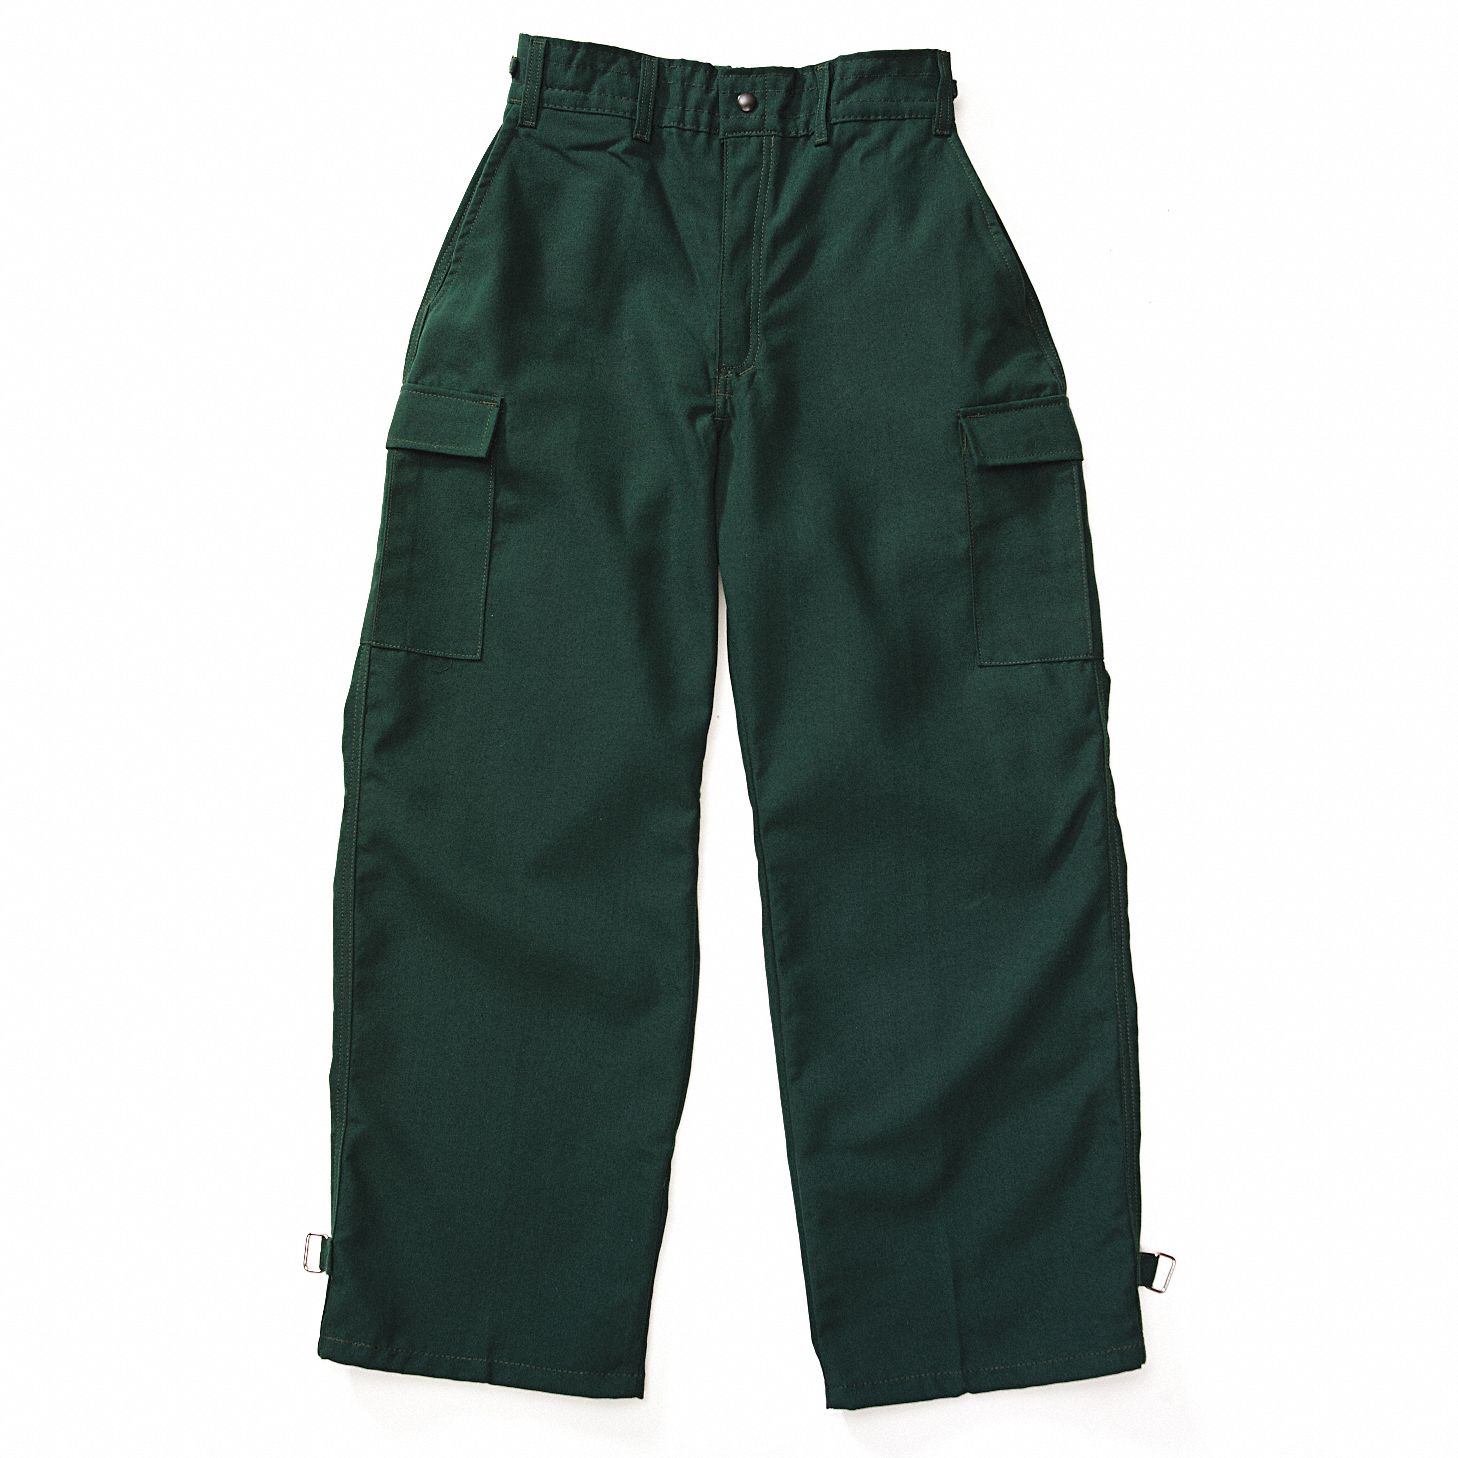 Flame Resistant Fabric and Nomex Thread Wildland Fire Pants, Green, 32 in Inseam, Fits Waist Size 39